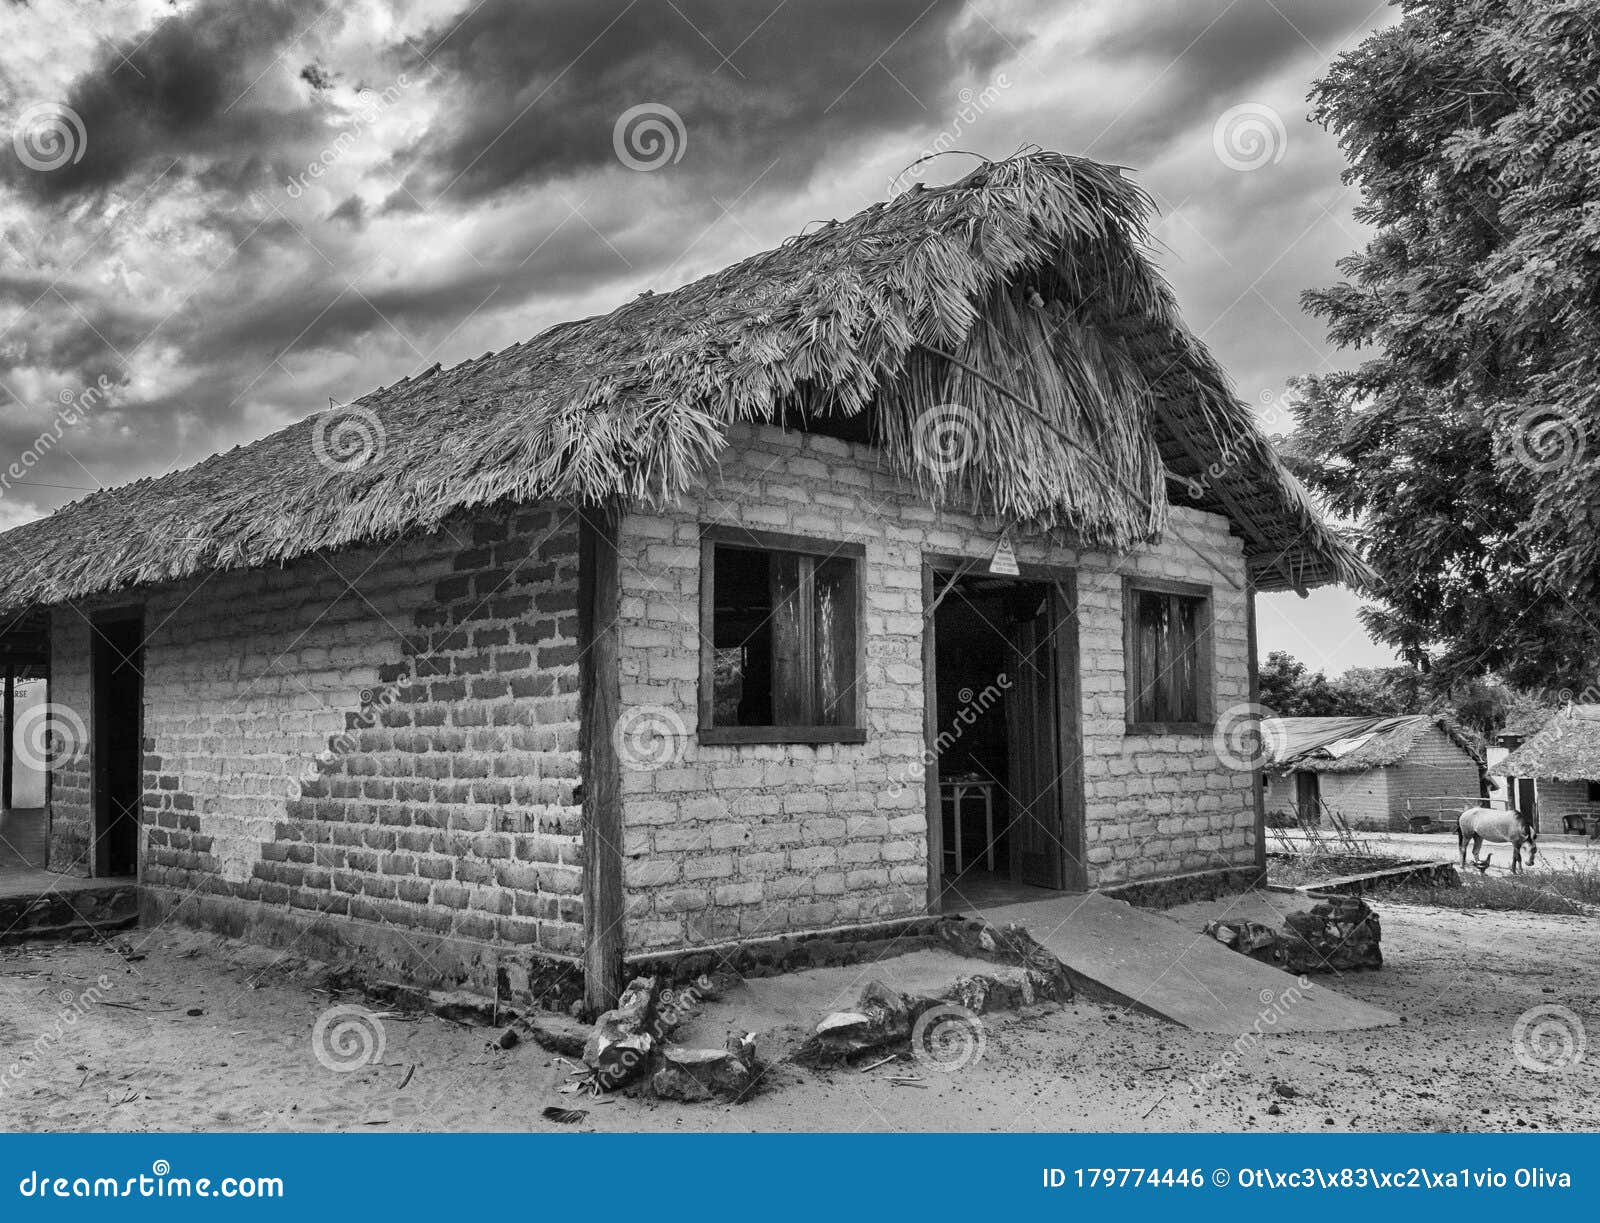 a typical house in the village of mumbuca, jalapao brazil.